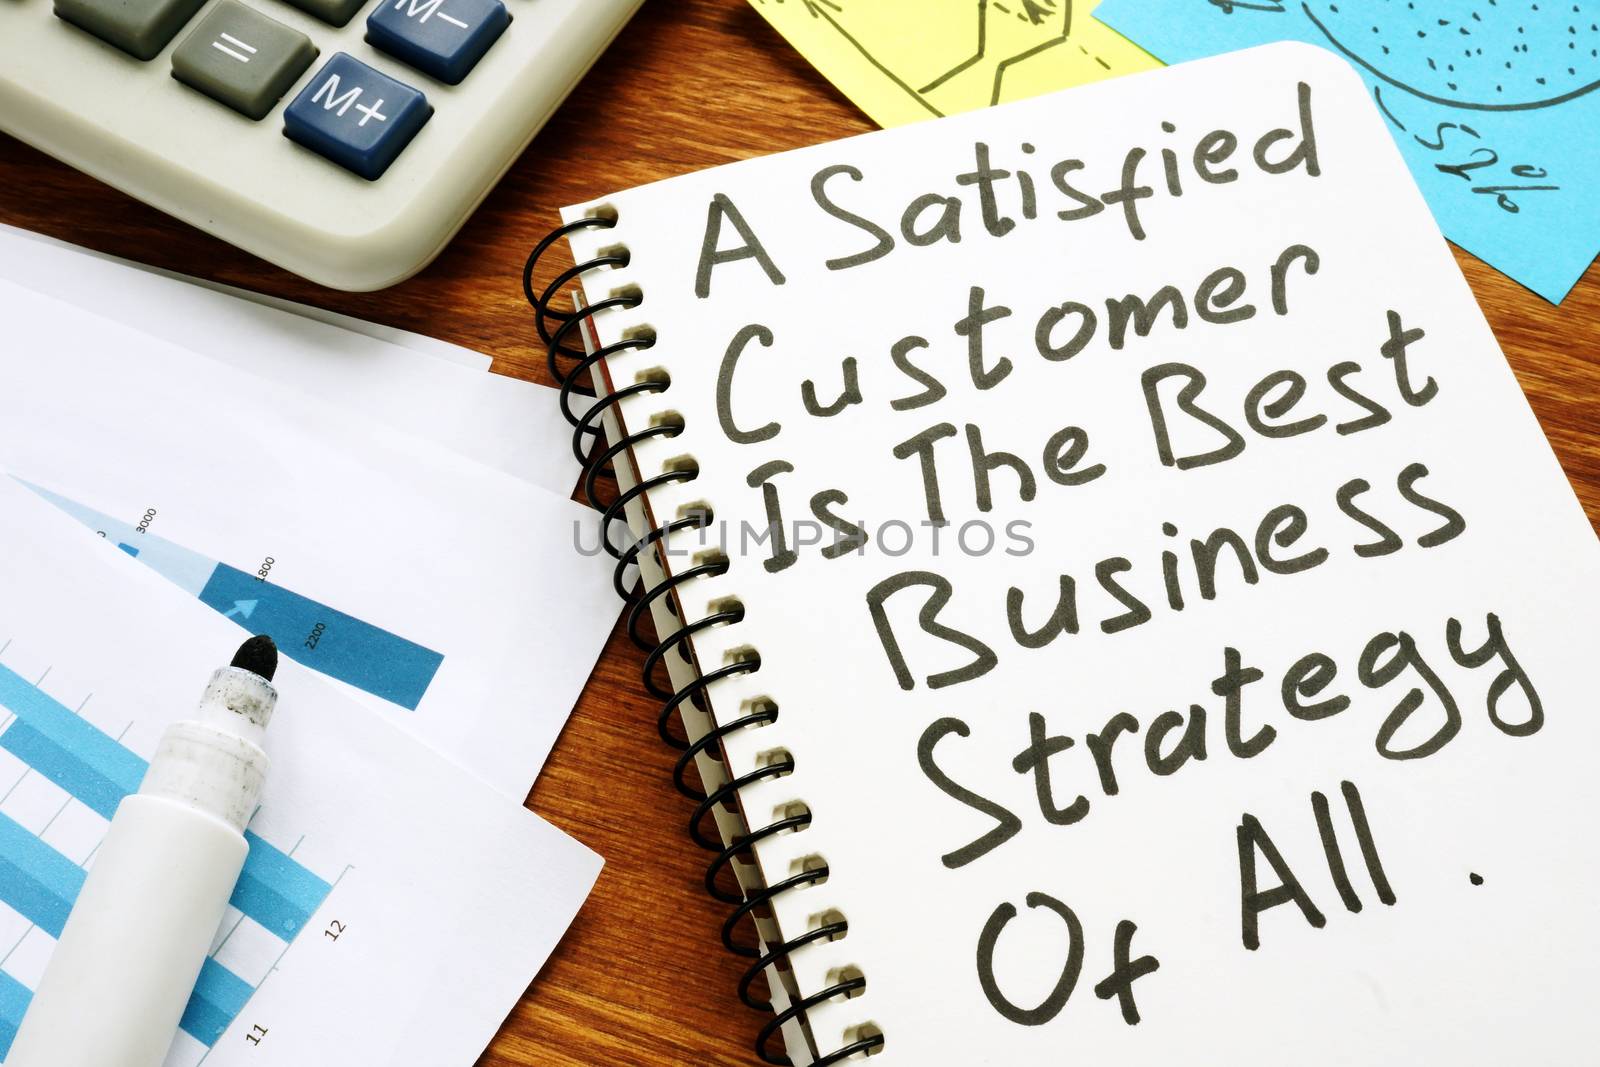 A satisfied customer is the best business strategy of all by designer491